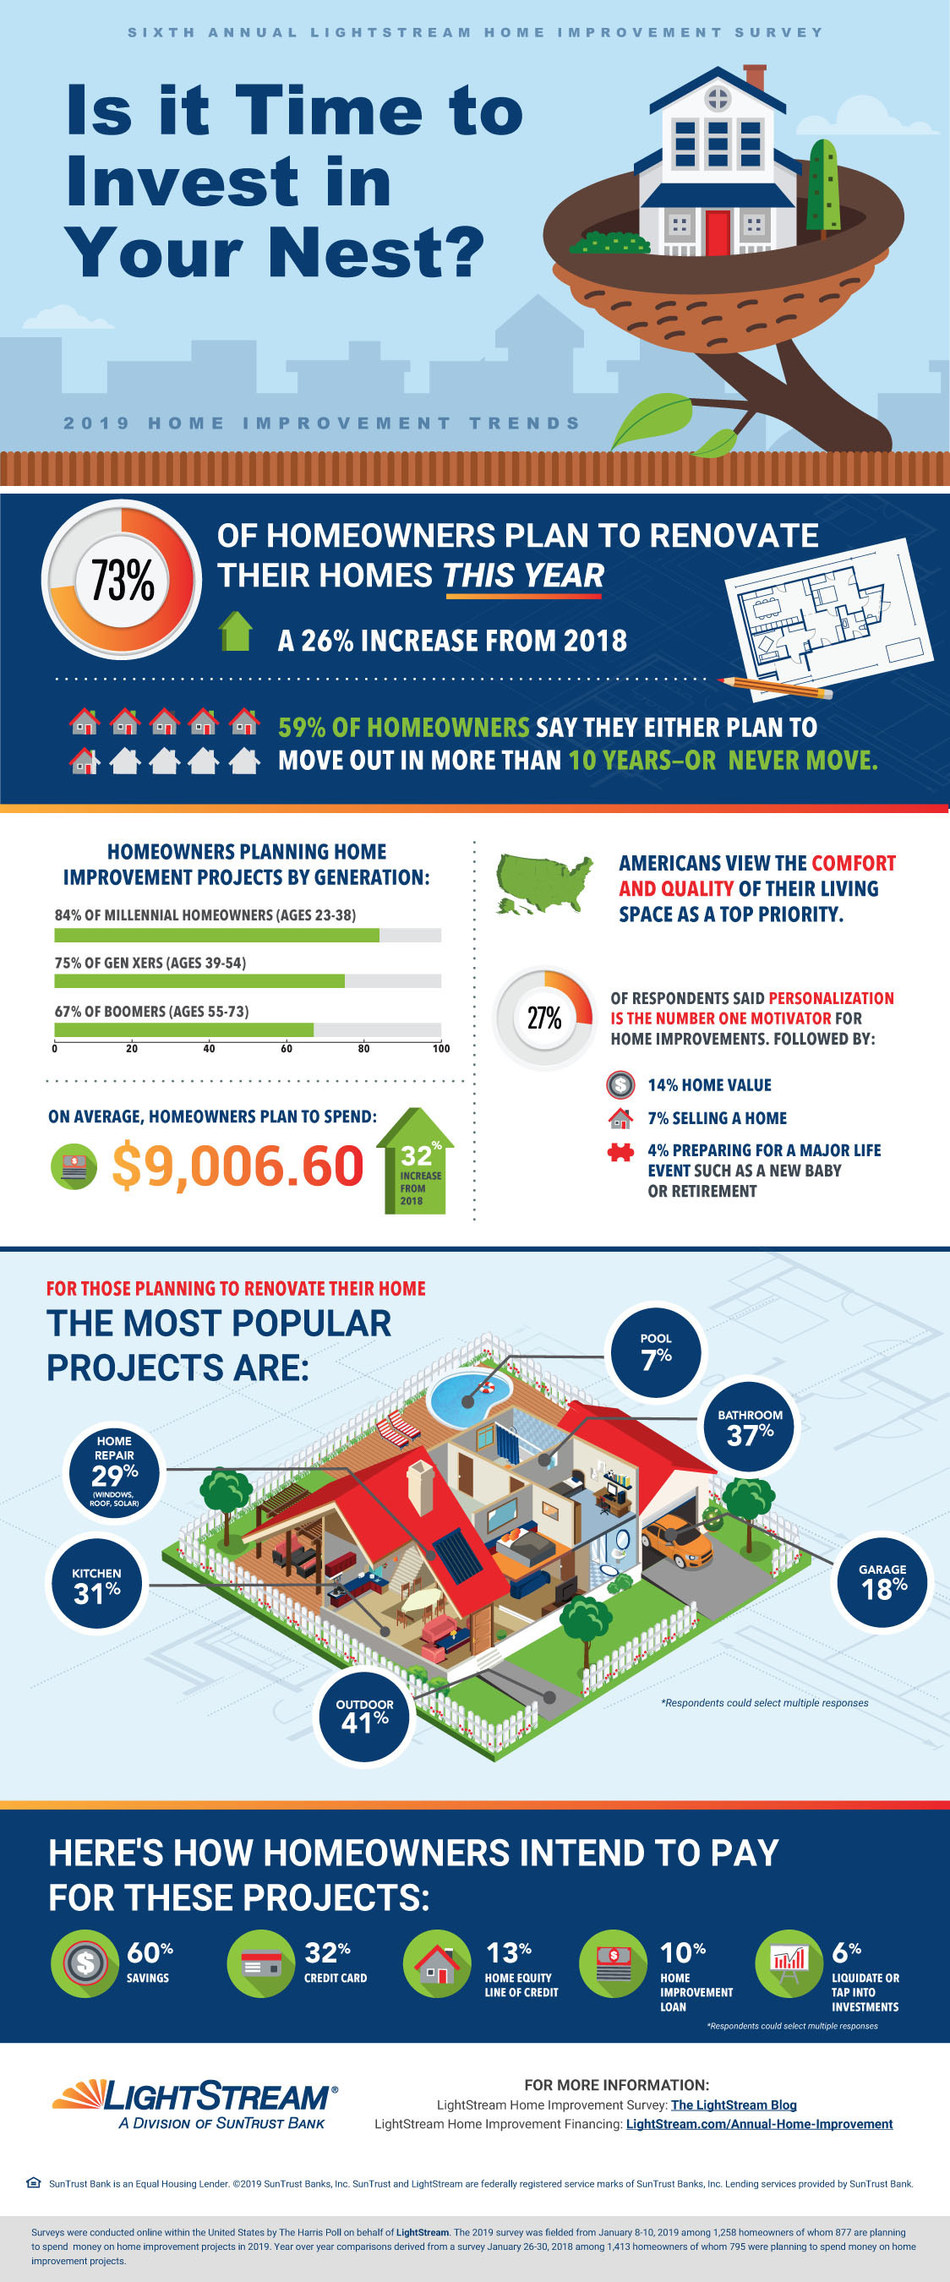 Nearly three in four (73%) homeowners surveyed plan to make home improvements this year, a 26% increase from 2018, according to the sixth annual LightStream Home Improvement Survey. Homeowners also plan to spend more on those renovations – an average of about $9,000, the highest amount since the survey began in 2014.